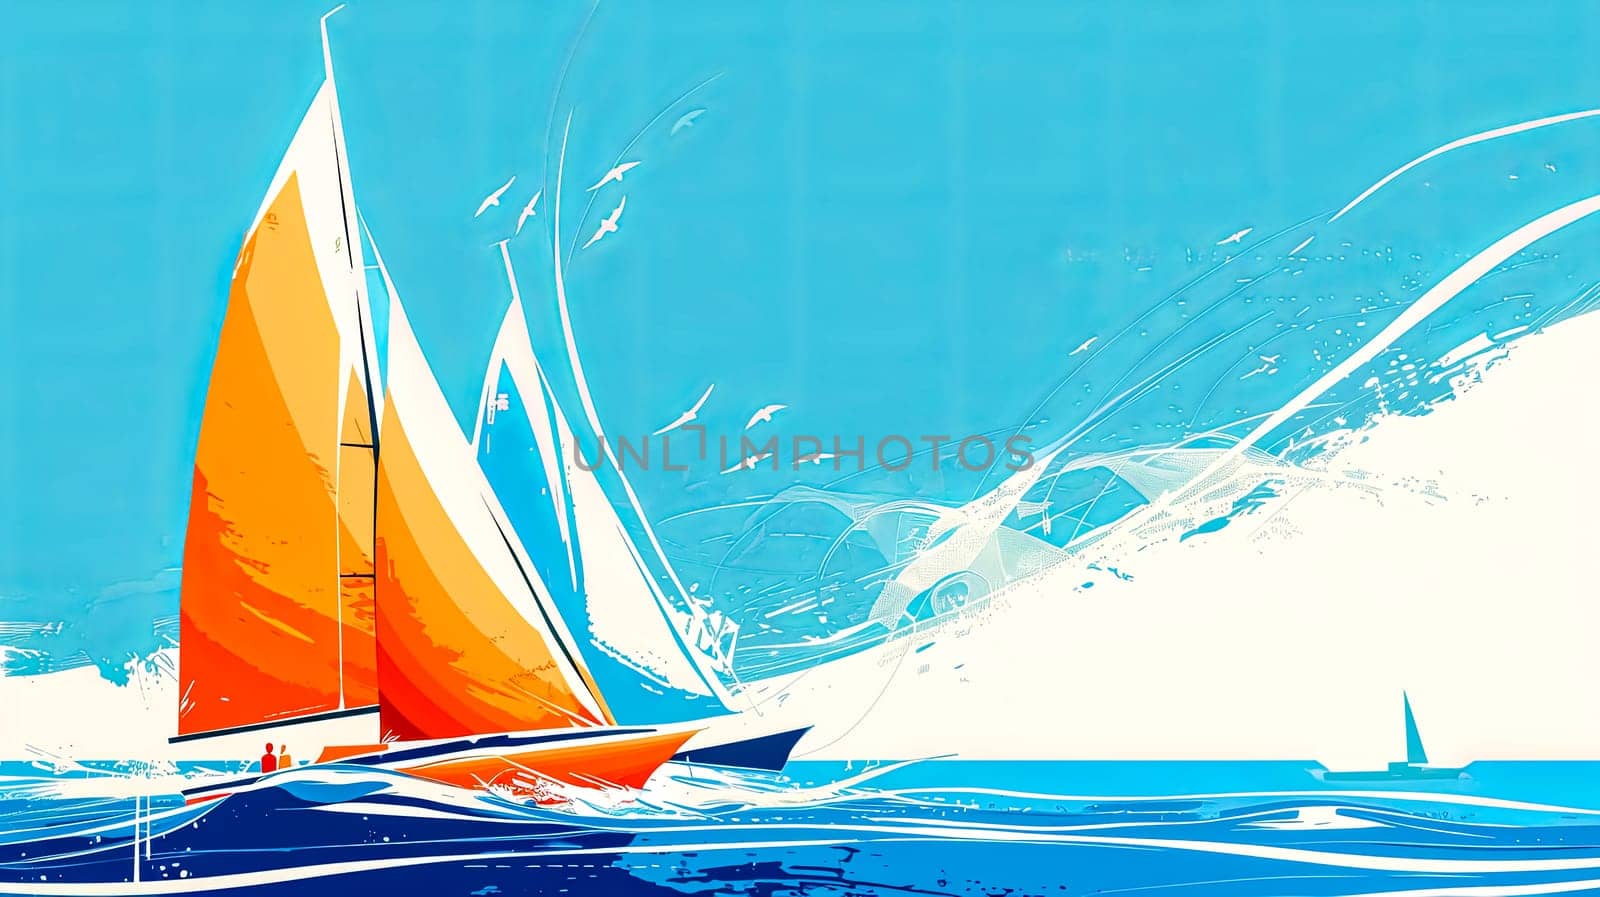 Abstract illustration of a sailboat with orange sails on a dynamic blue ocean by Edophoto